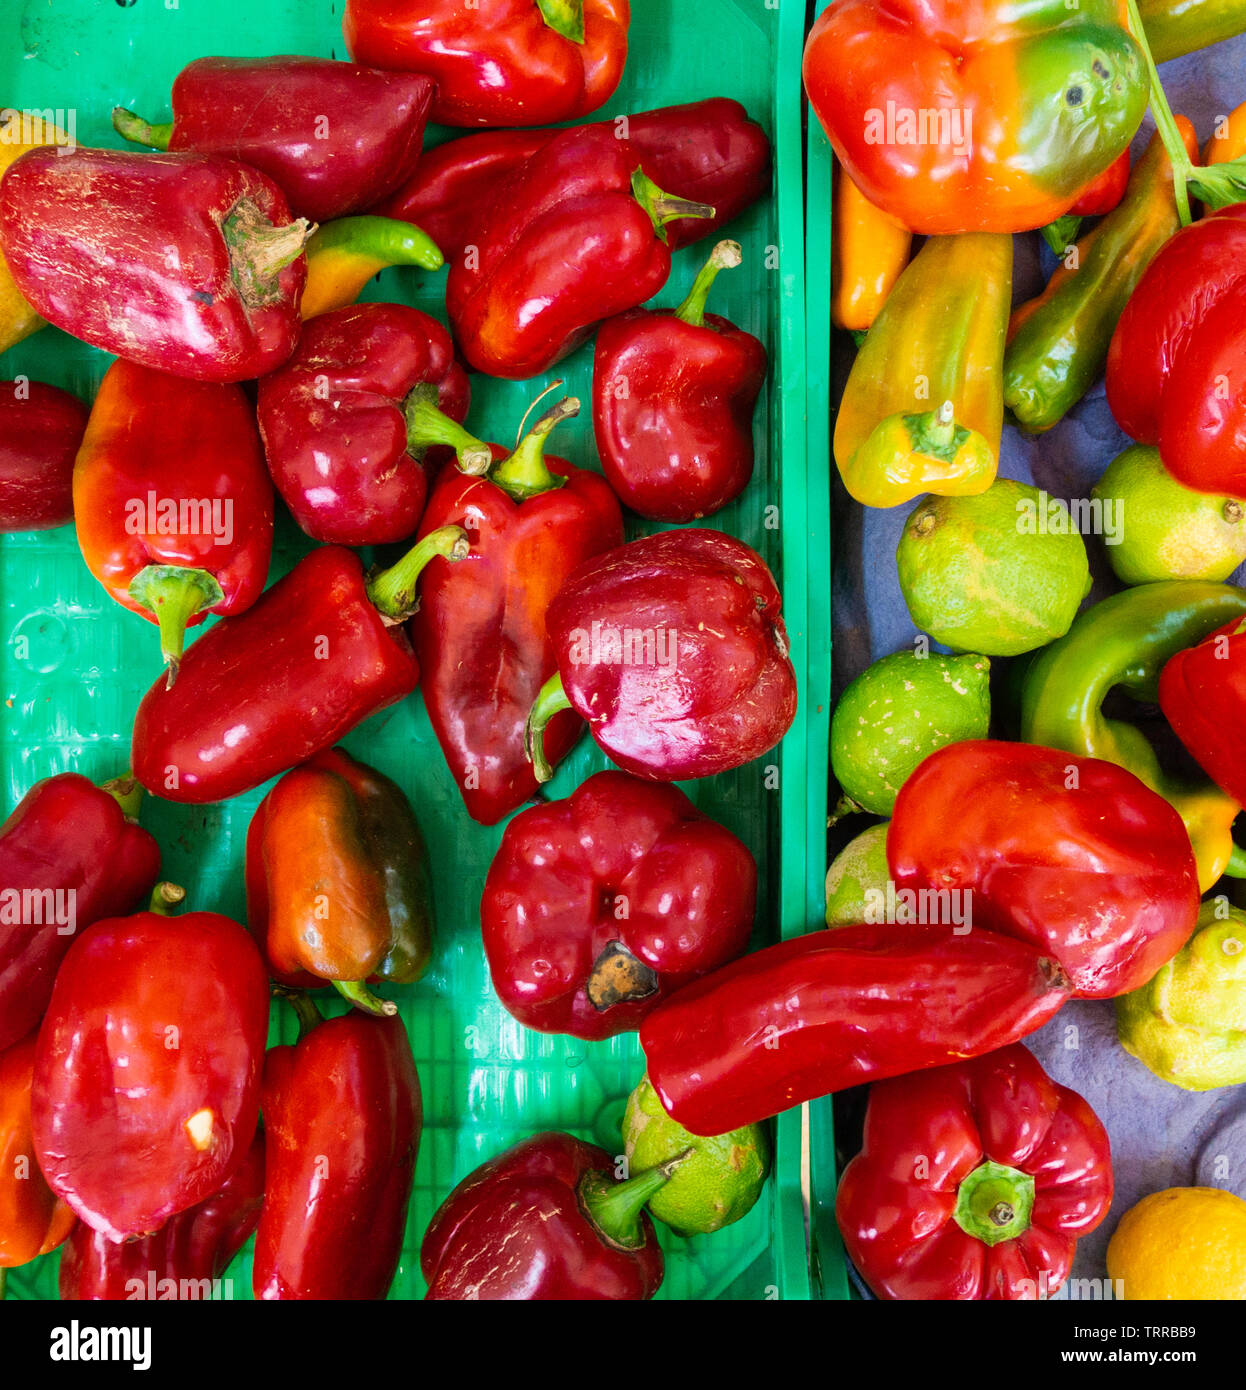 Red Peppers on market stall in Spain Stock Photo